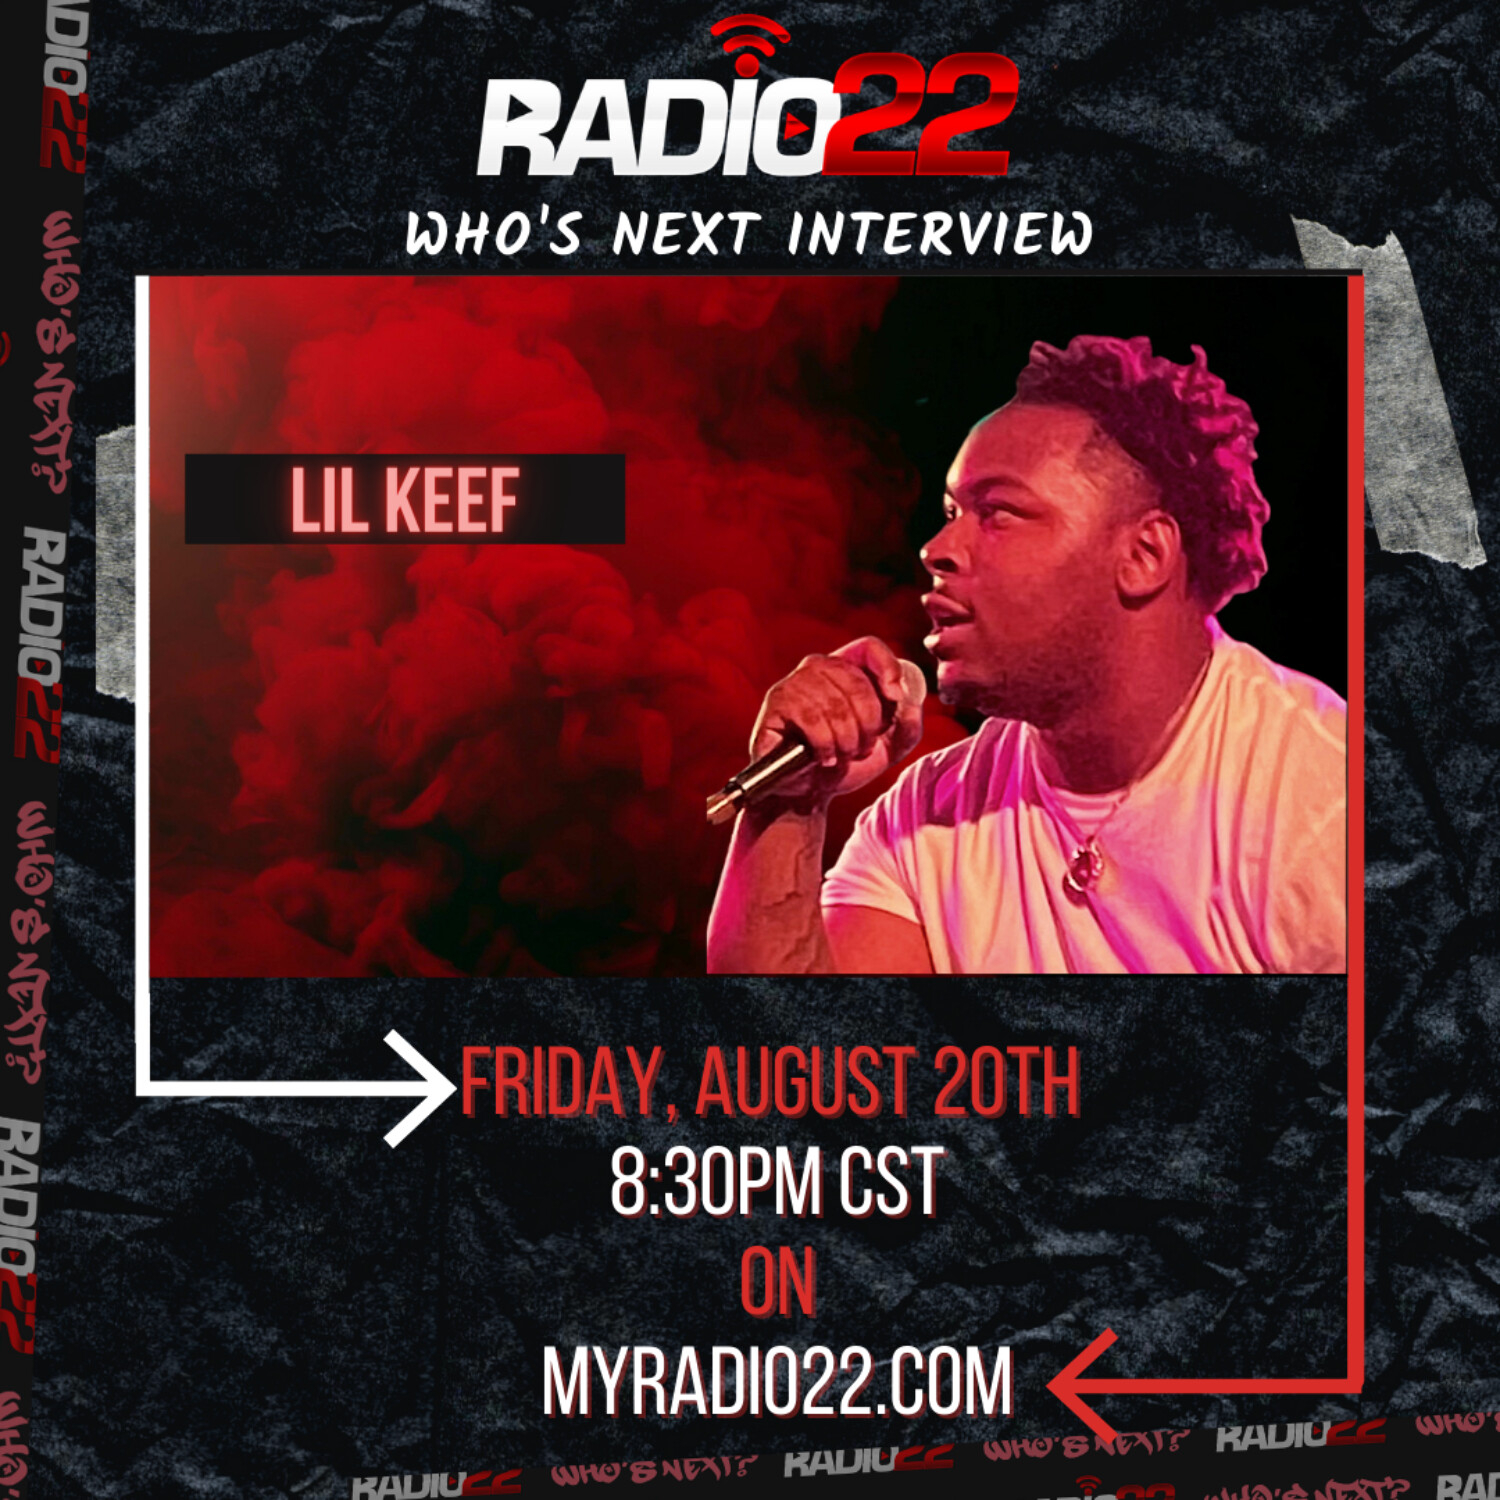 Who's Next: Lil Keef Interview